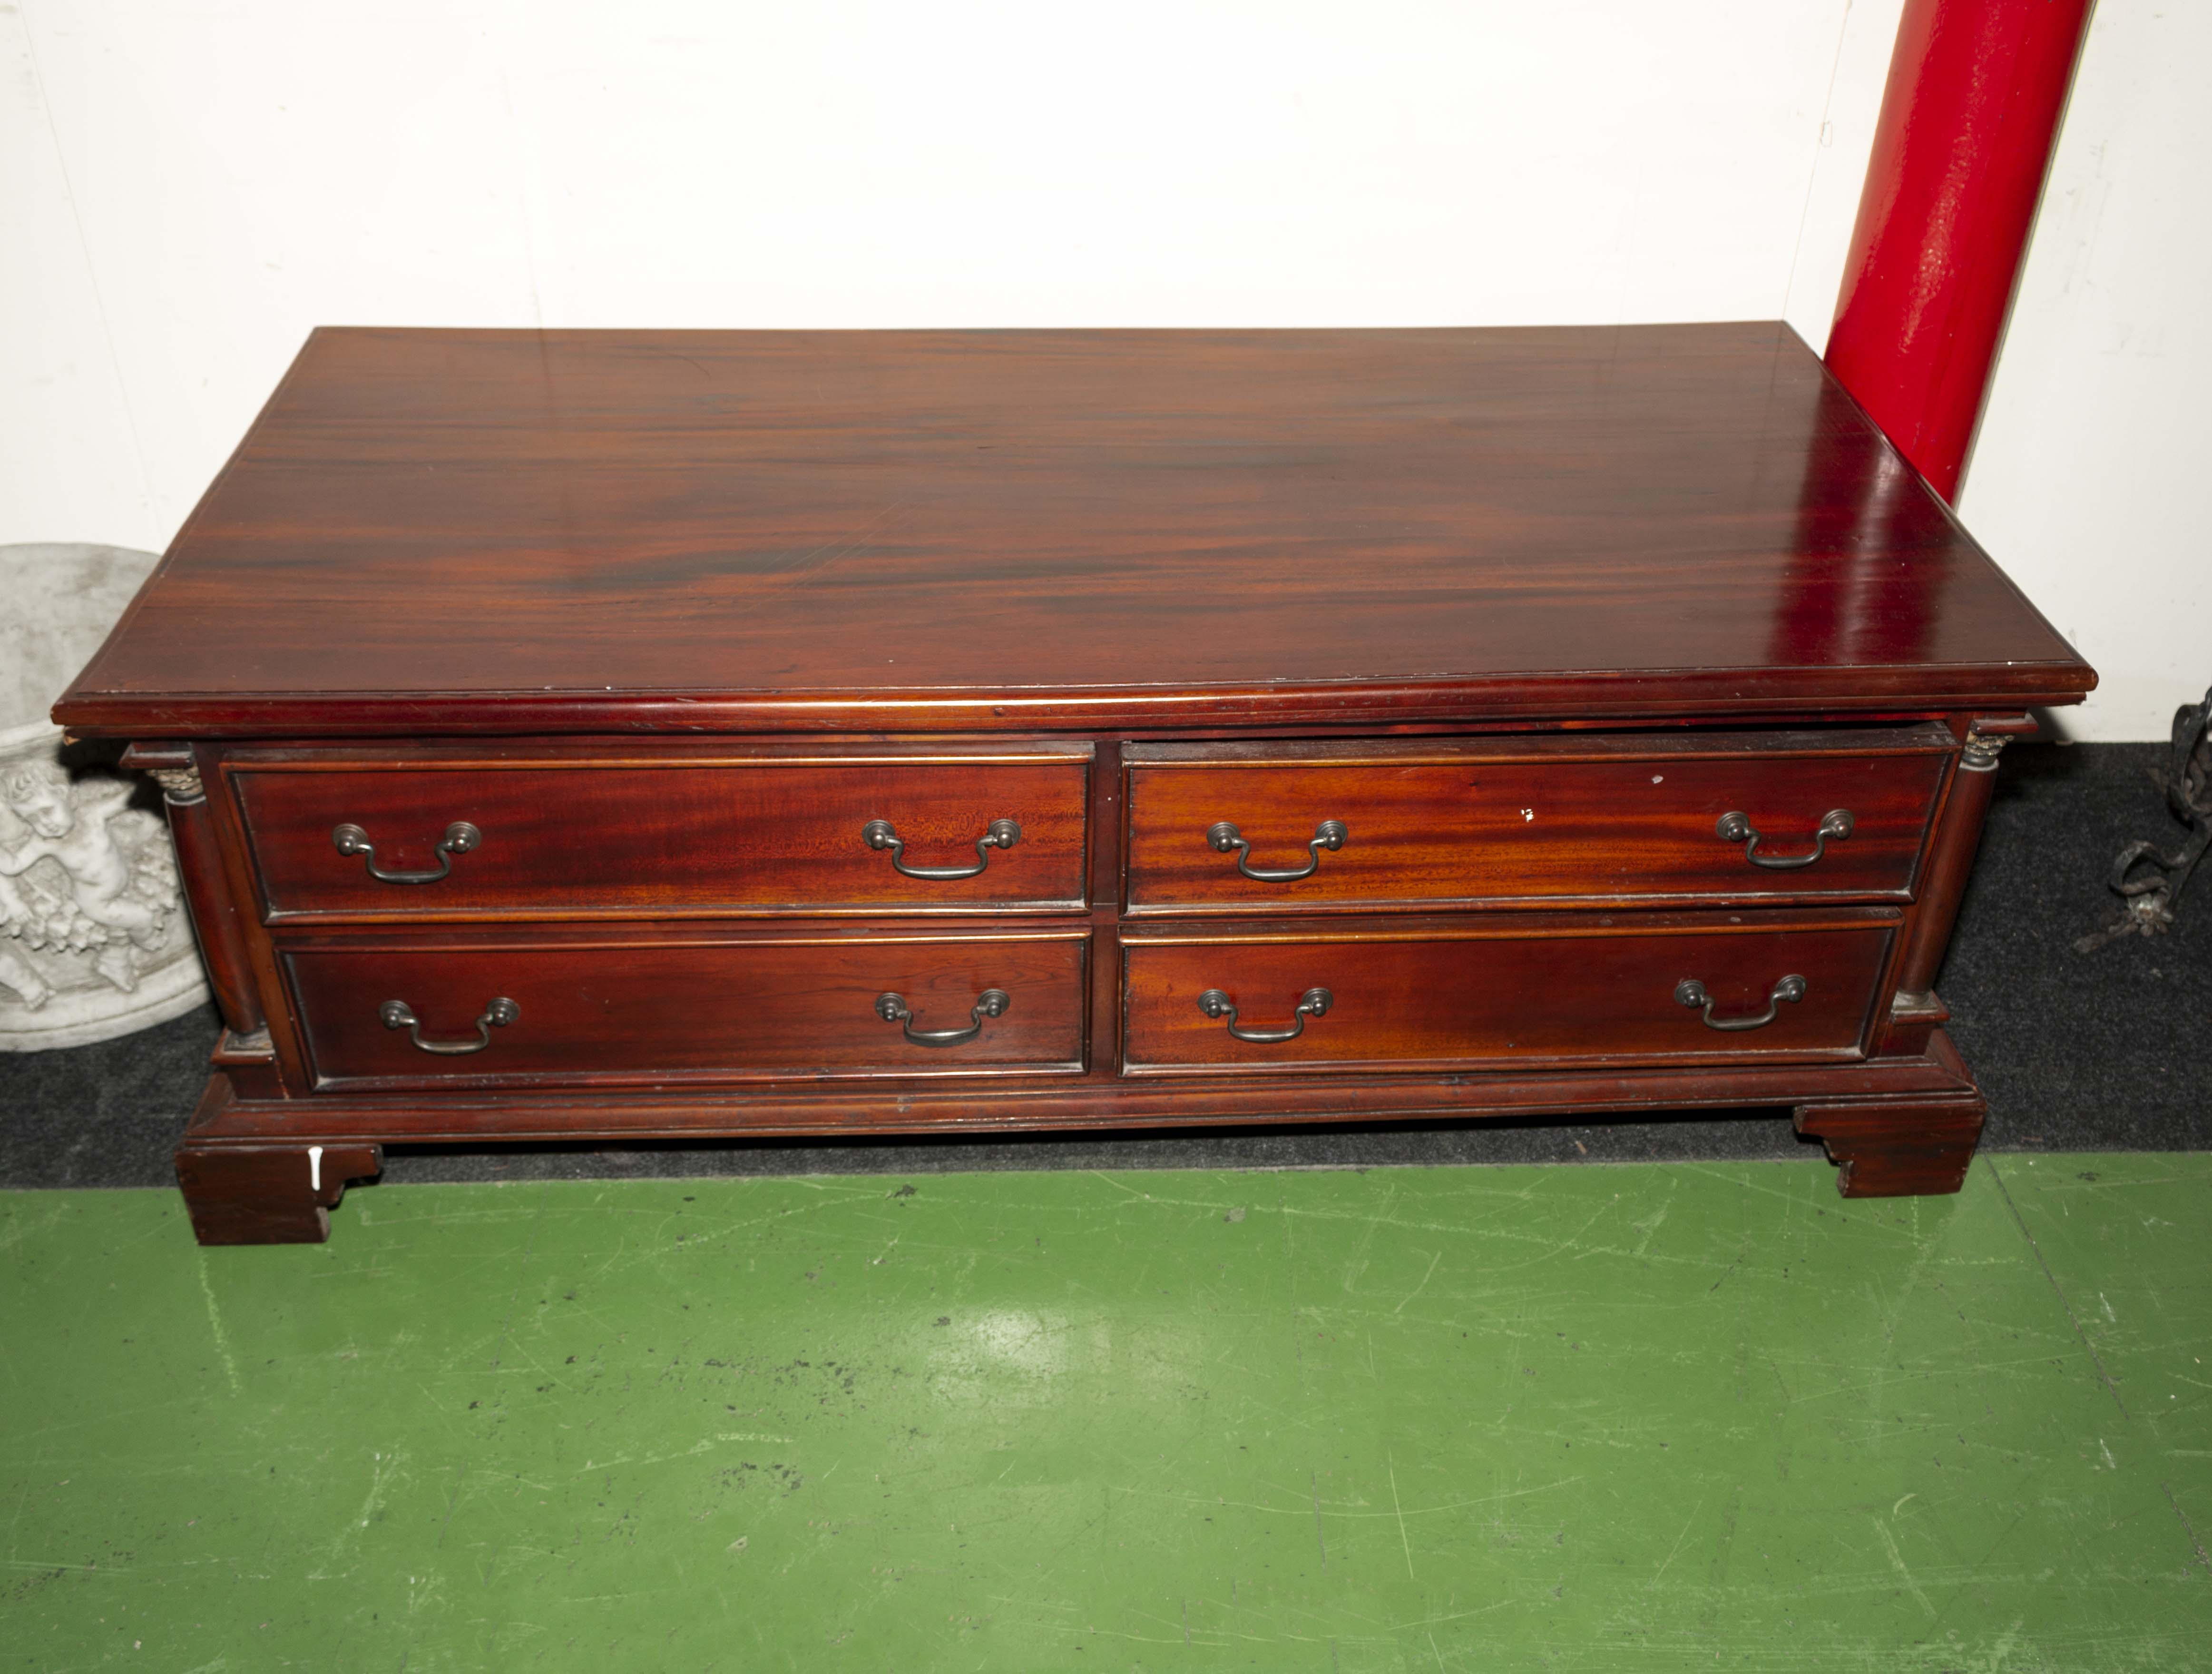 A large coffee table with drawers